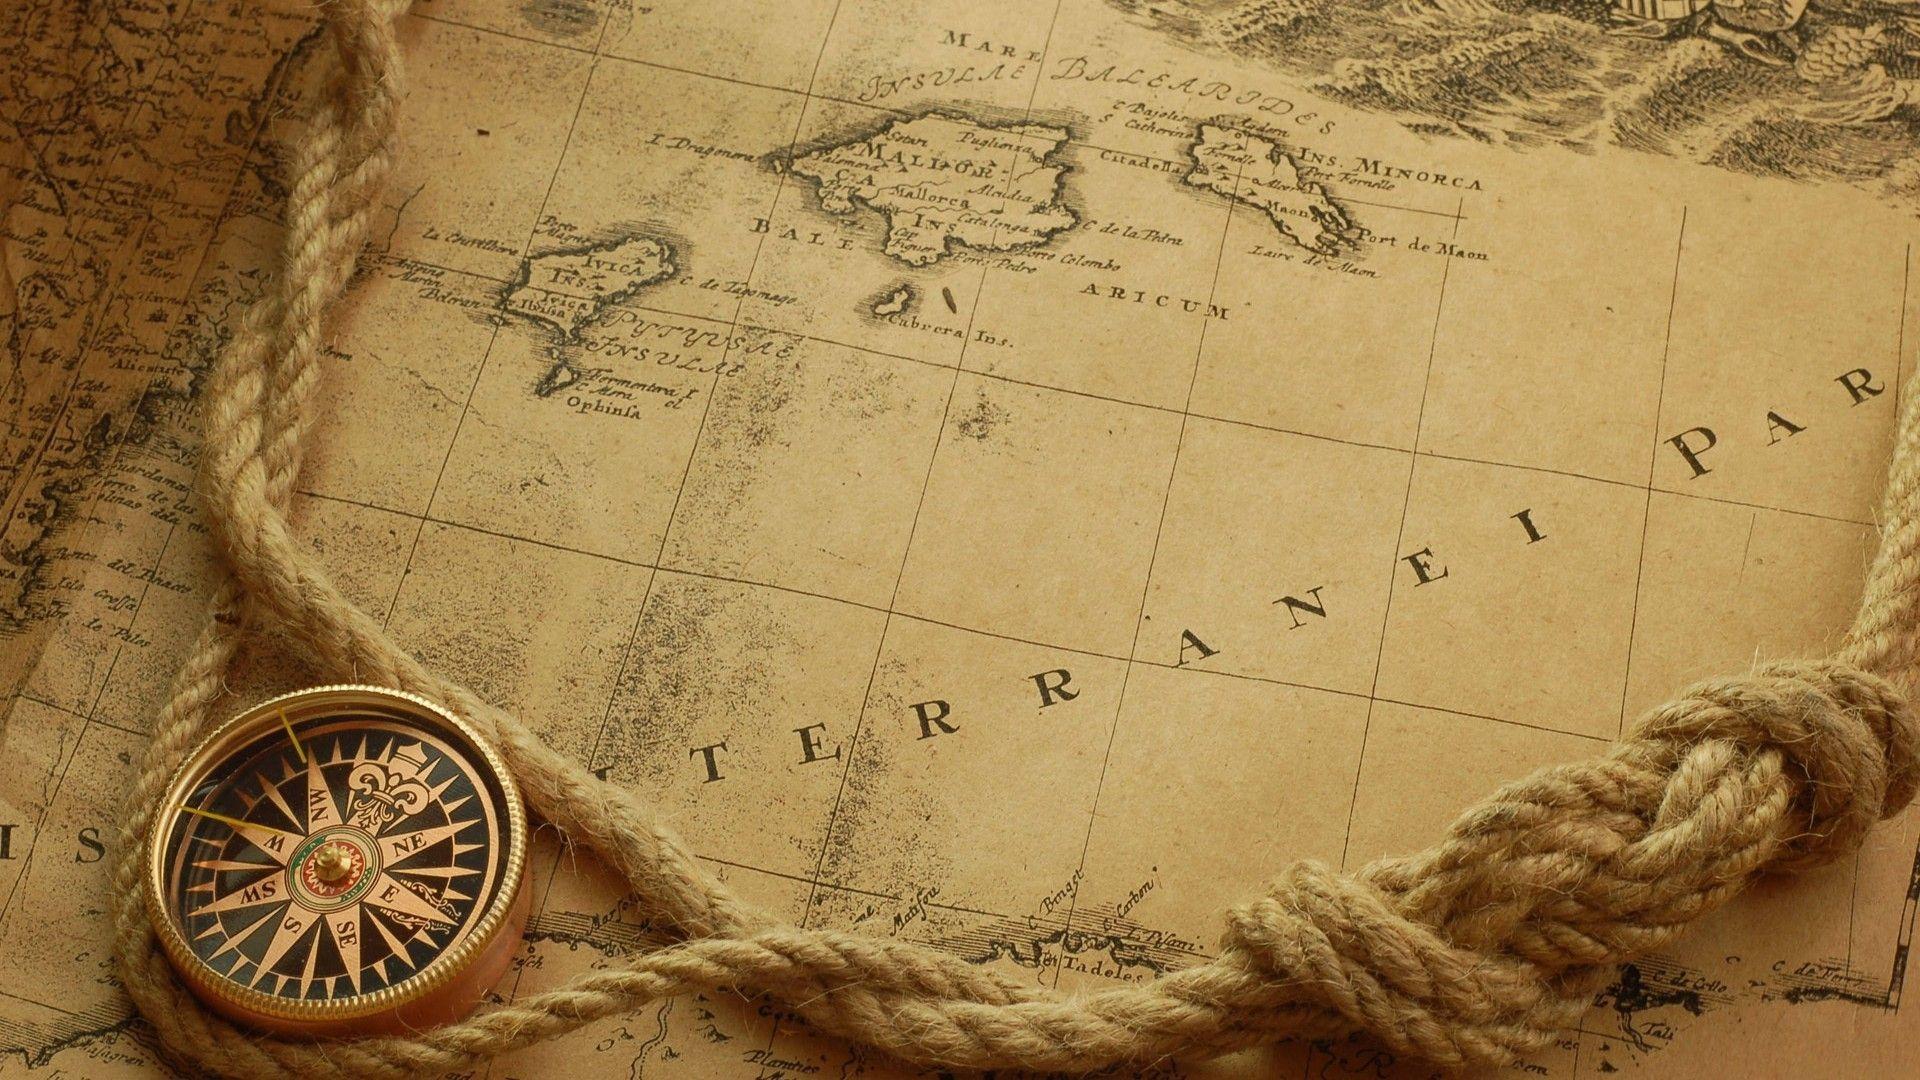 Vintage Maps Wallpaper HD 1920x1080px Vintage Maps. 試してみたい